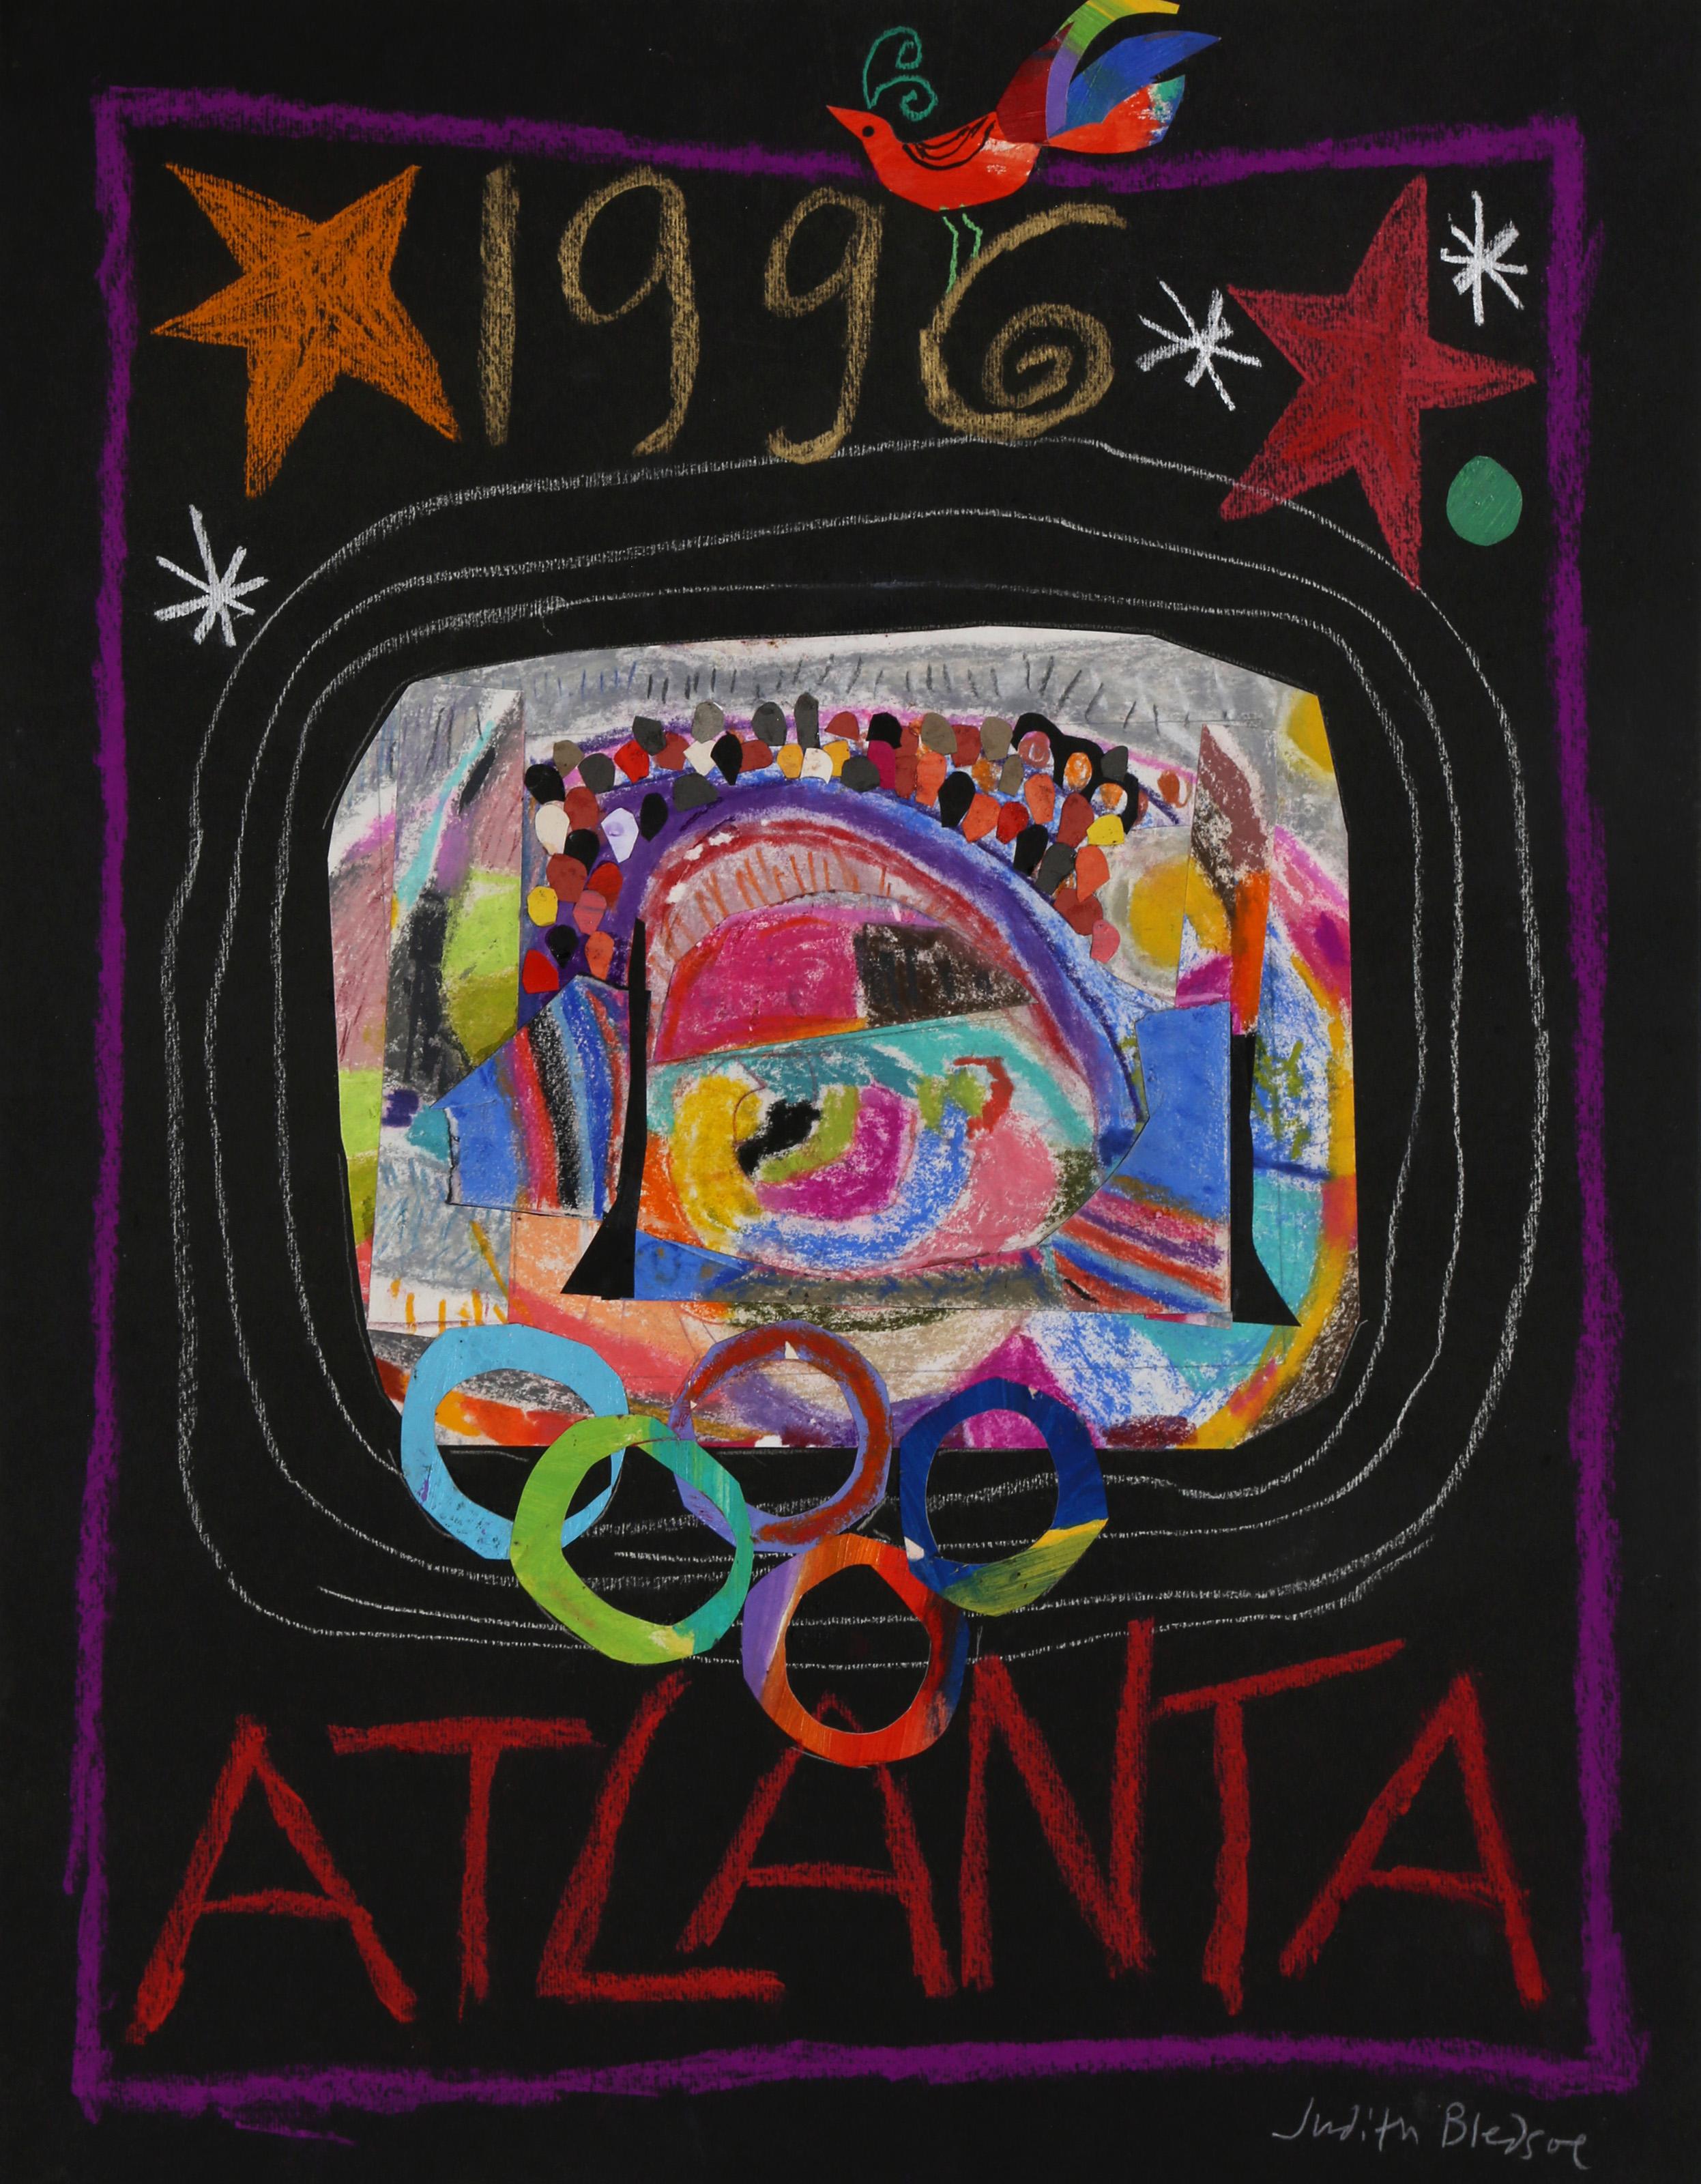 Judith Bledsoe, American (1938 - 2013) -  Atlanta Olympics Stadium. Year: circa 1996, Medium: Pastel and Collage on Paper, signed l.r., Size: 25 x 19.5 in. (63.5 x 49.53 cm), Description: Judith Bledsoe's colorful representation of the 1996 Atlanta